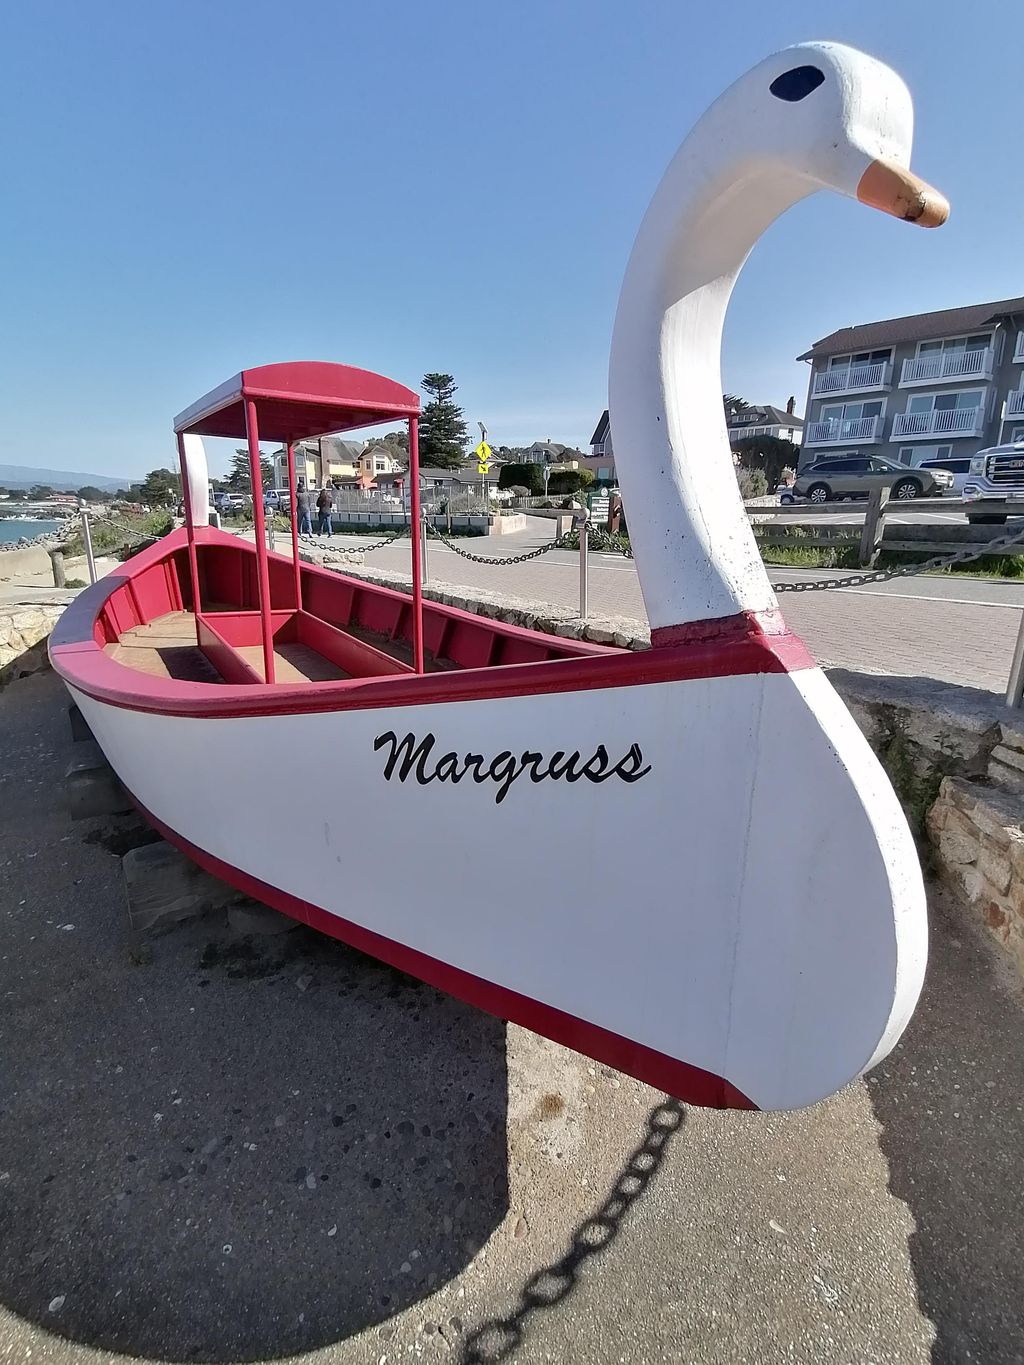 Margruss-The-Swan-Boats-of-Pacific-Grove